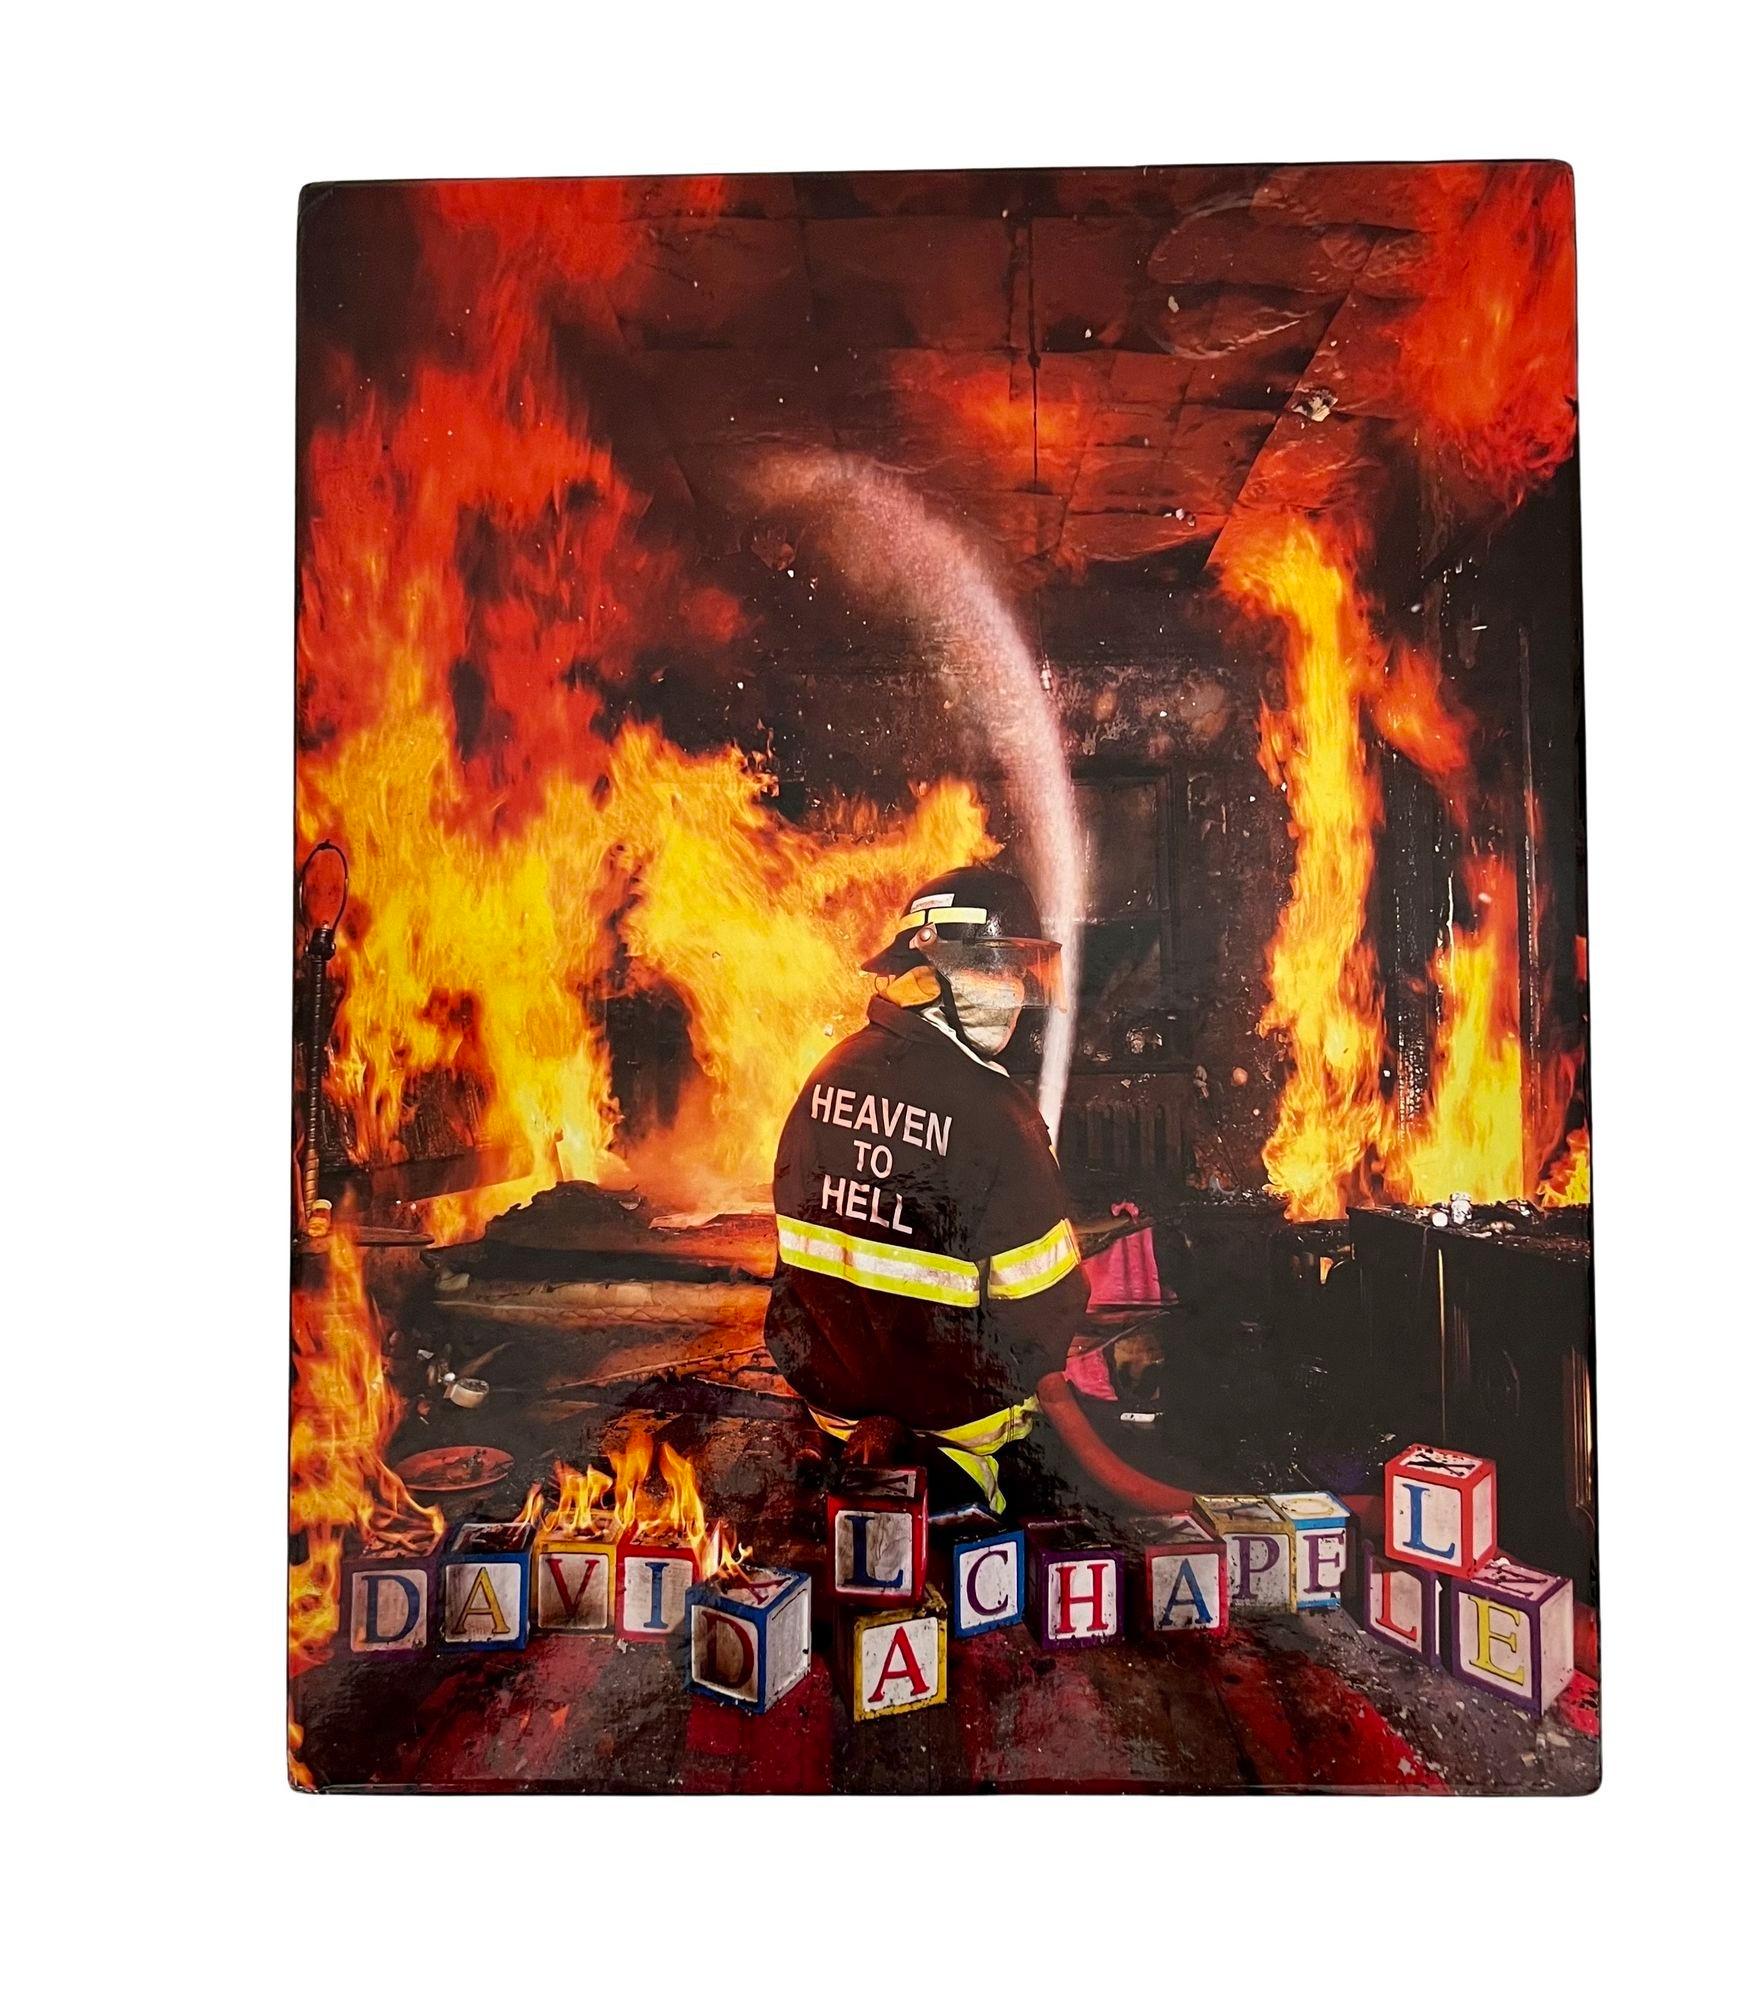 Heaven to Hell by David LaChapelle, Ed. TASCHEN 2006 Hardcover book.
Collectible LaChapelle 